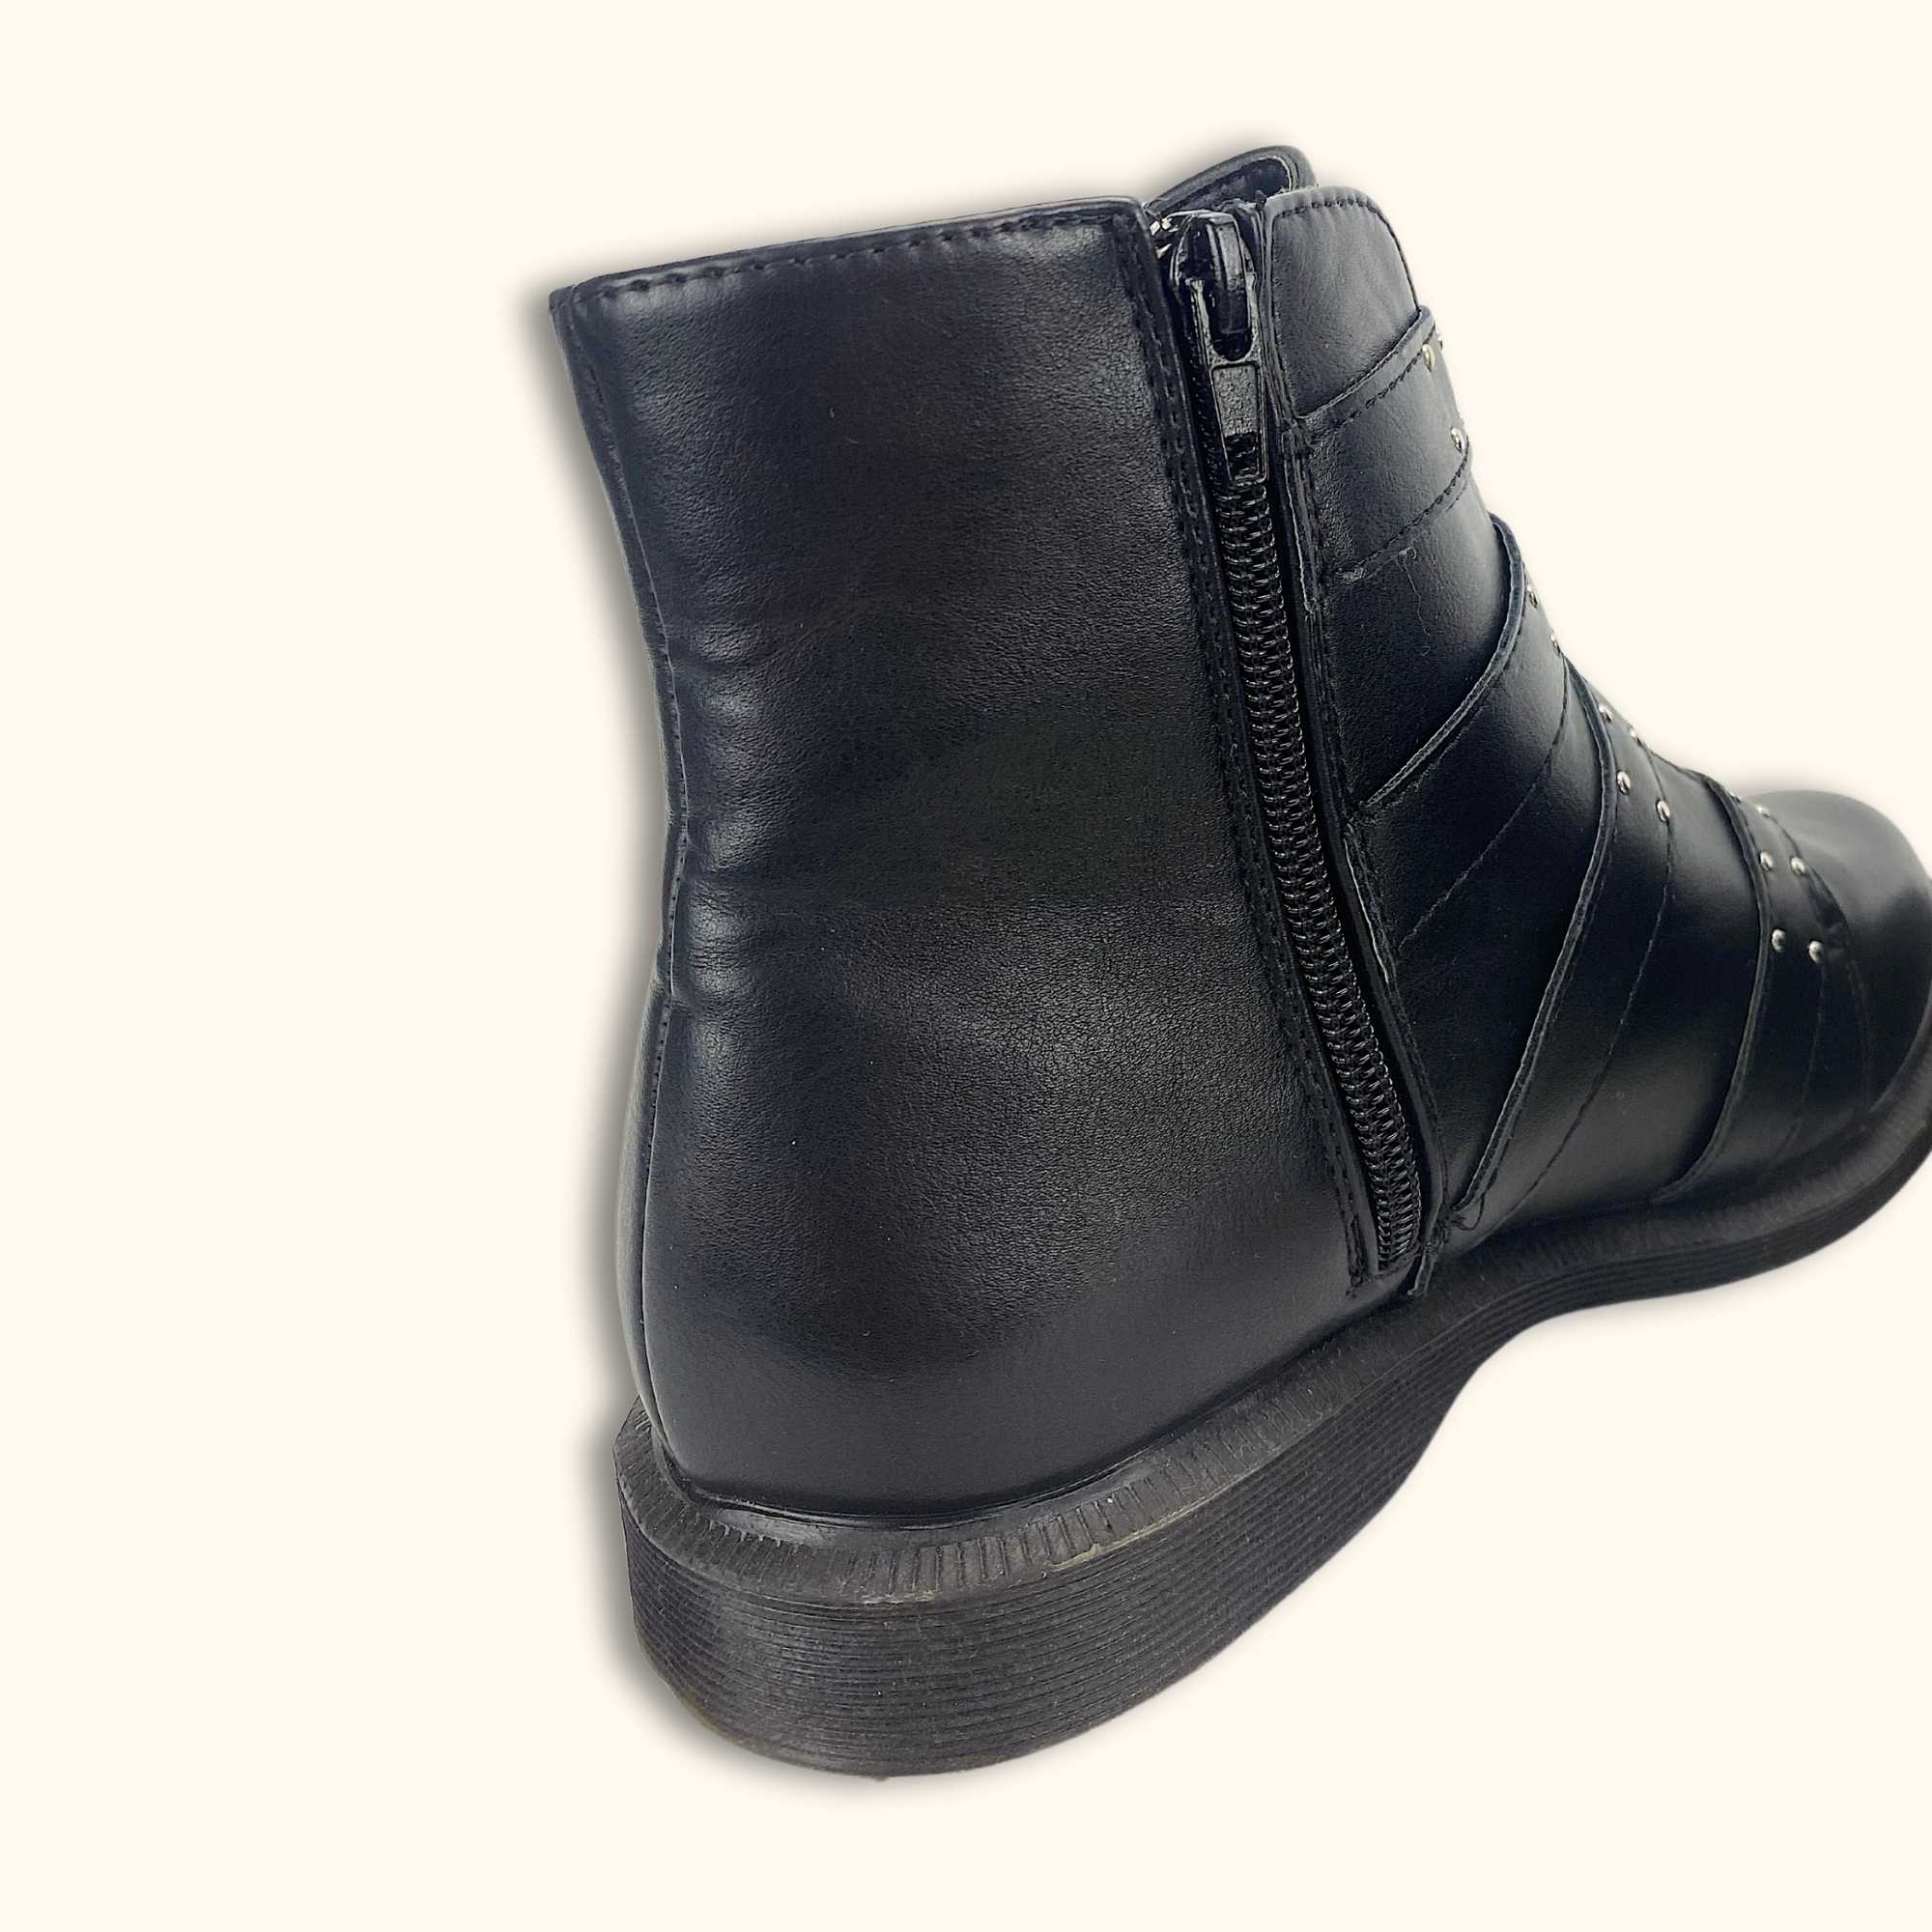 Truffle Collection Black Faux Leather Ankle Boots - Size 4 - Truffle collection - Flats